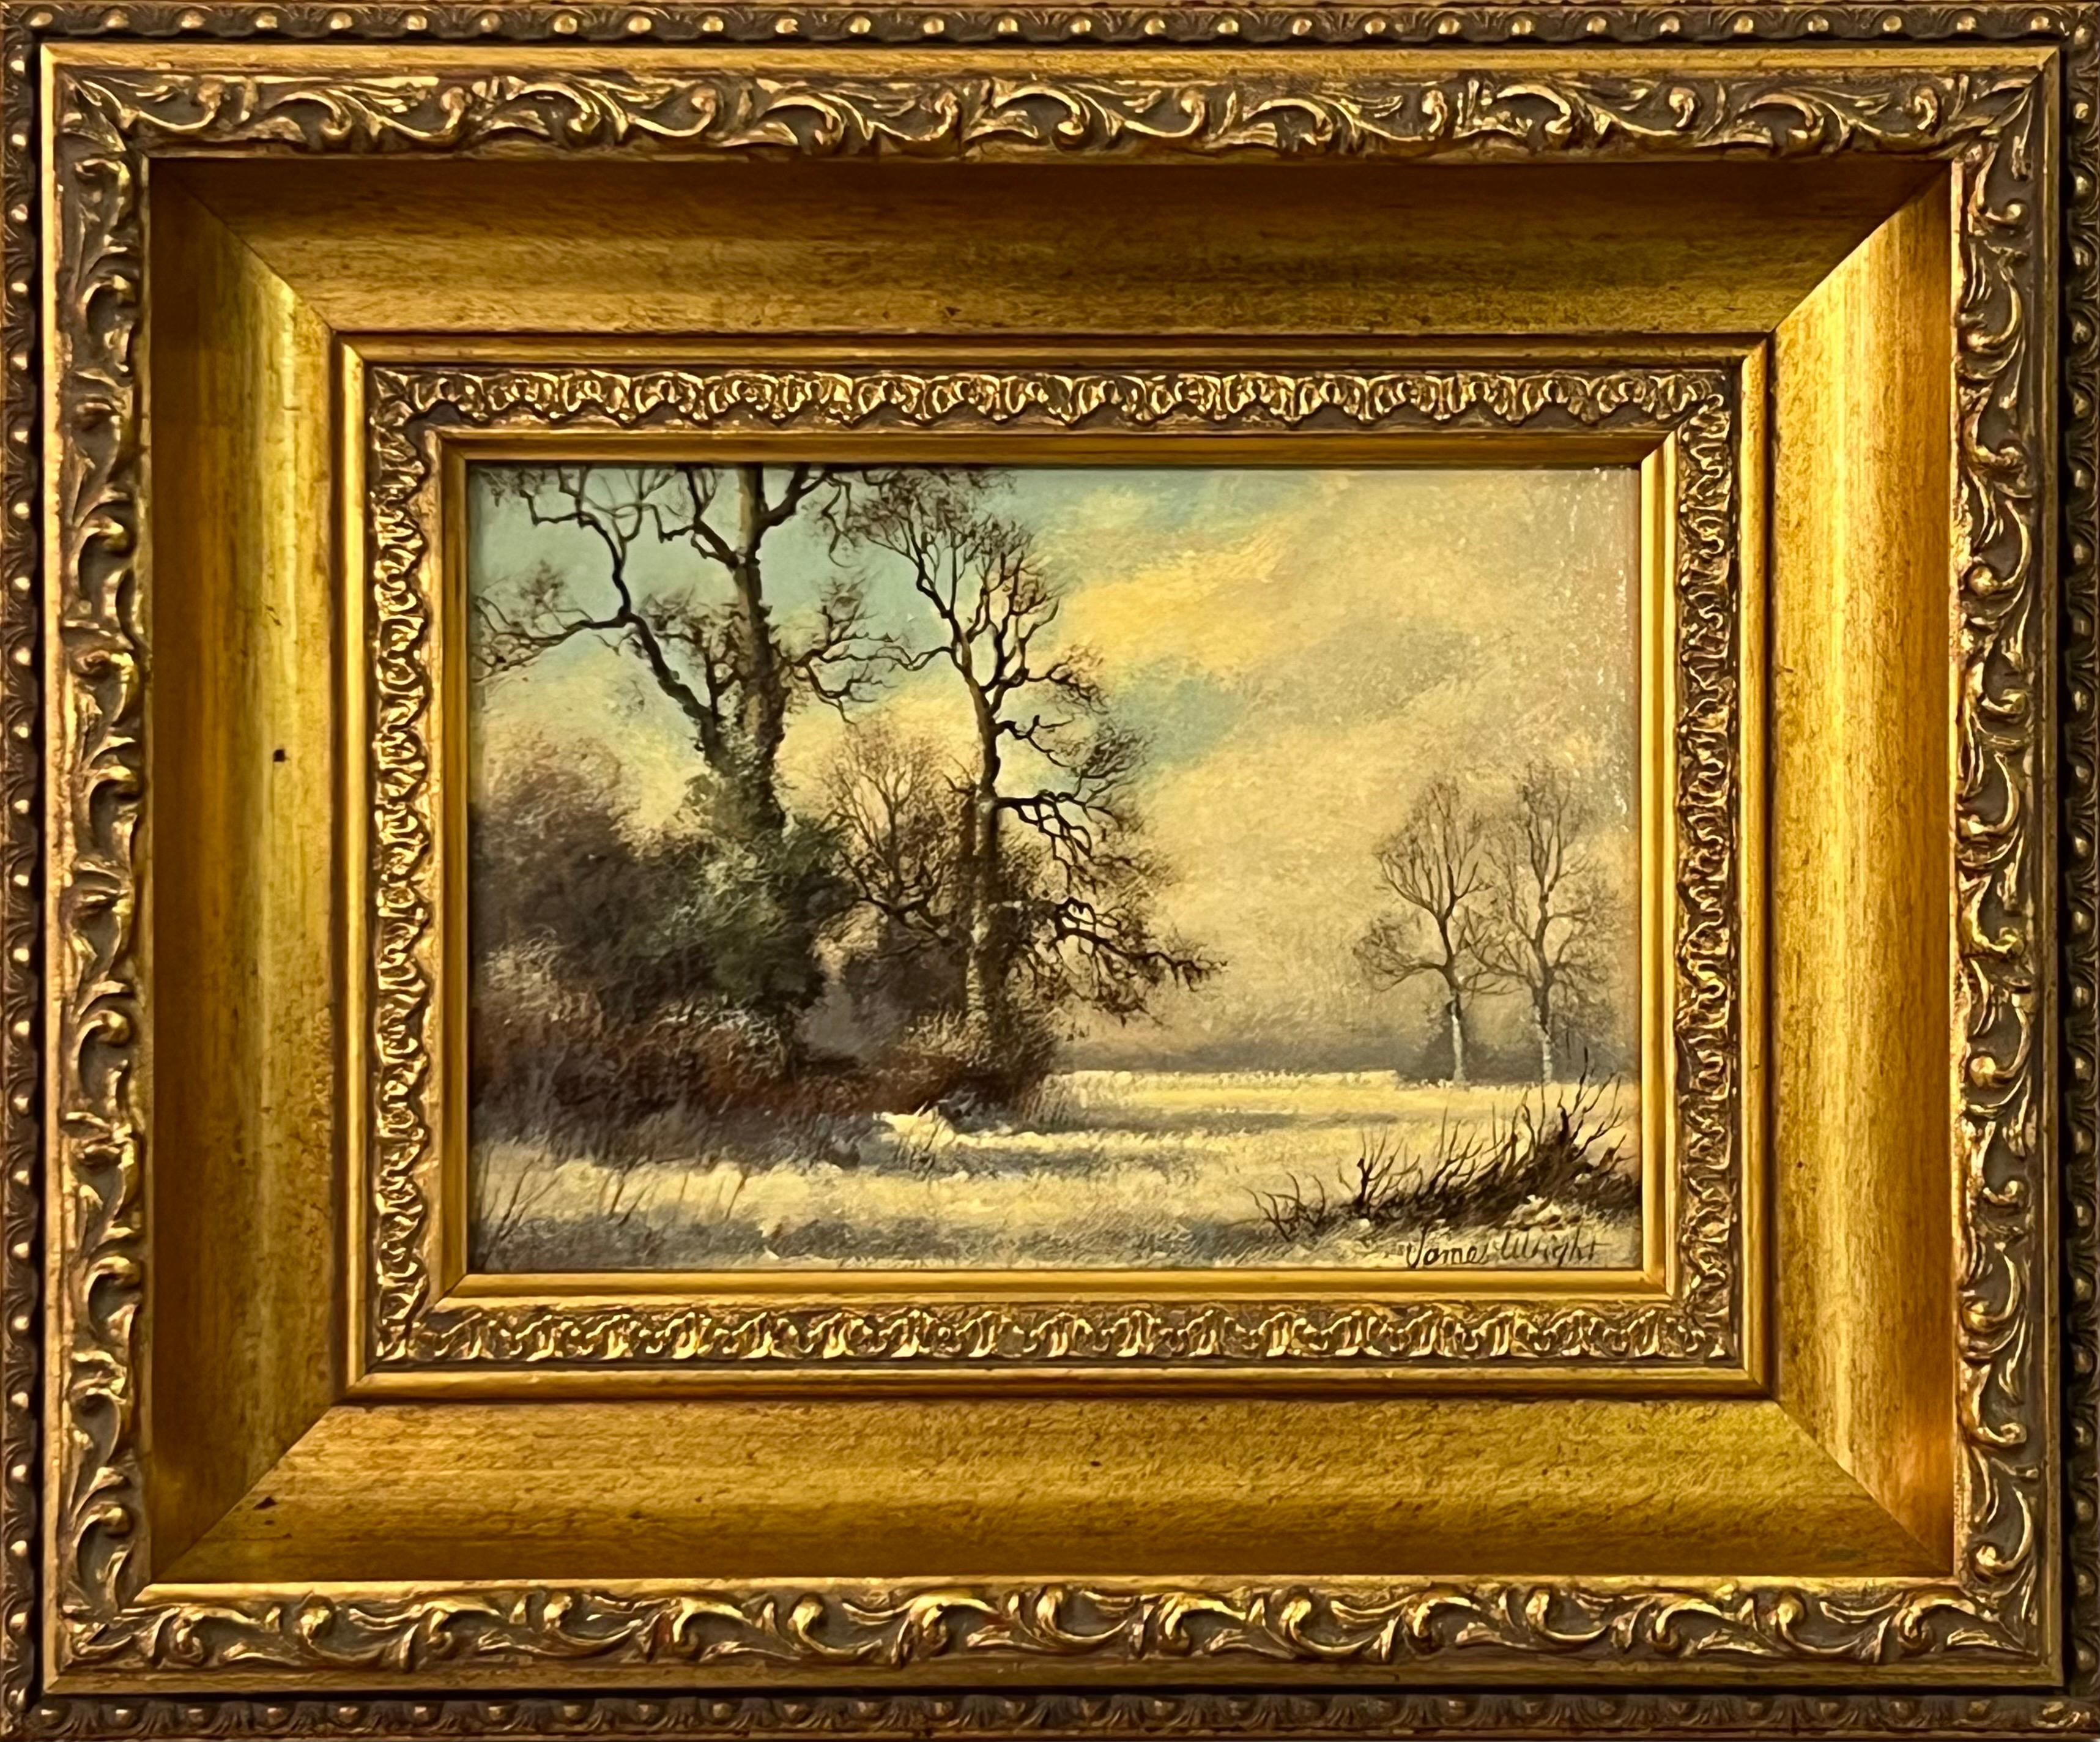 James Wright Animal Painting - Winter Landscape Snow Scene in the English Countryside by 20th Century Artist